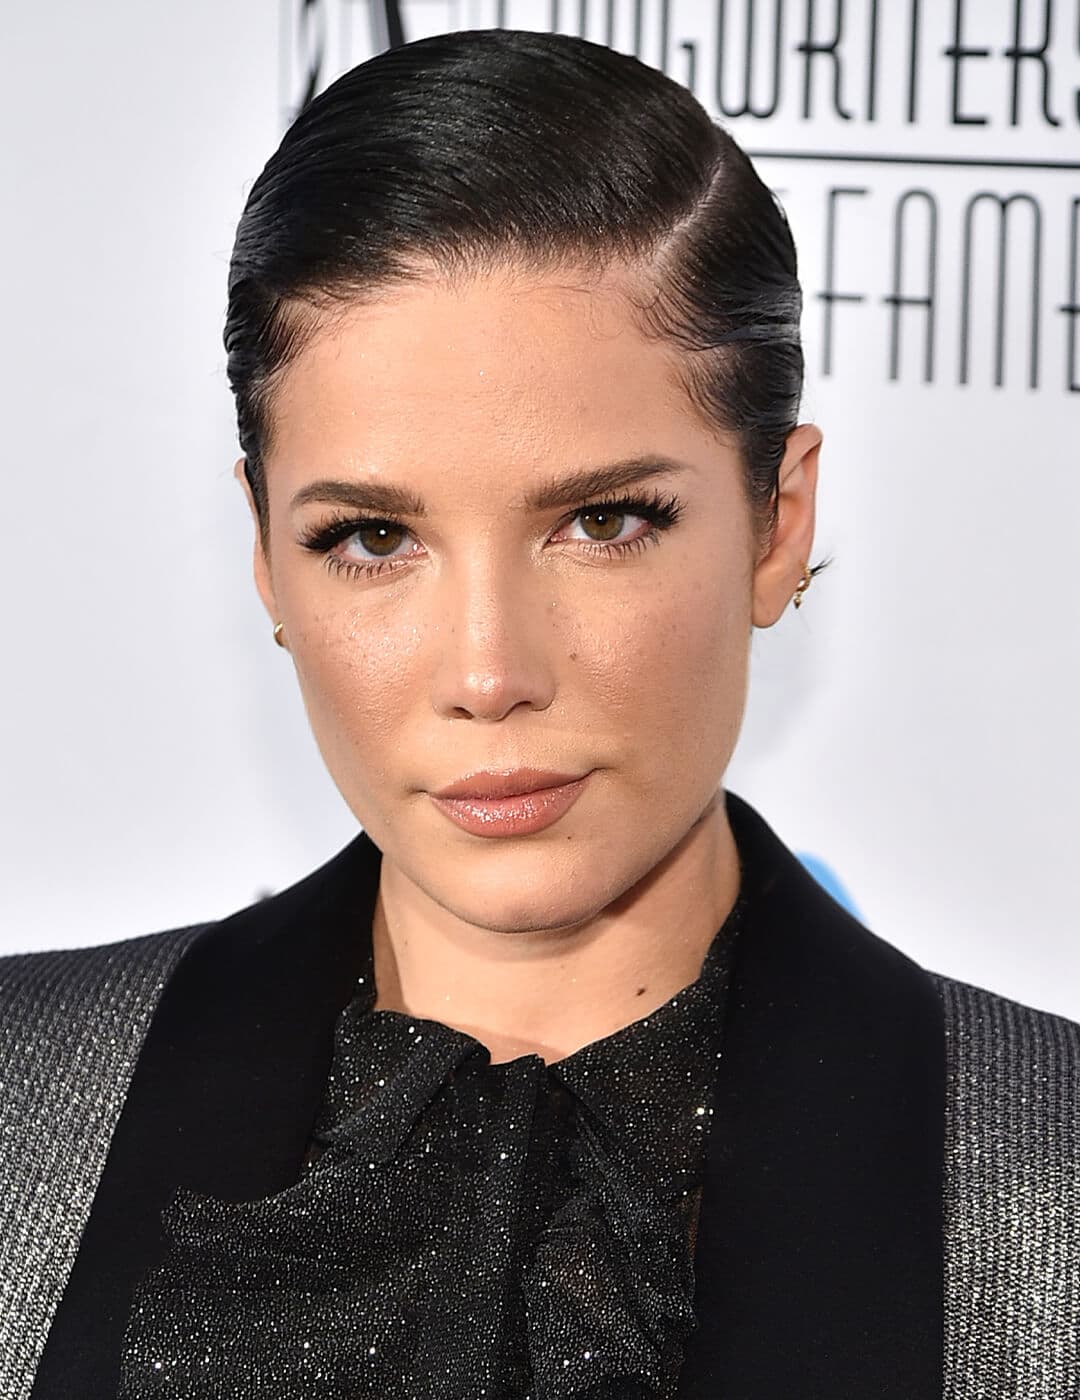 Halsey rocking a slicked-back pixie hairstyle and a no-makeup makeup look